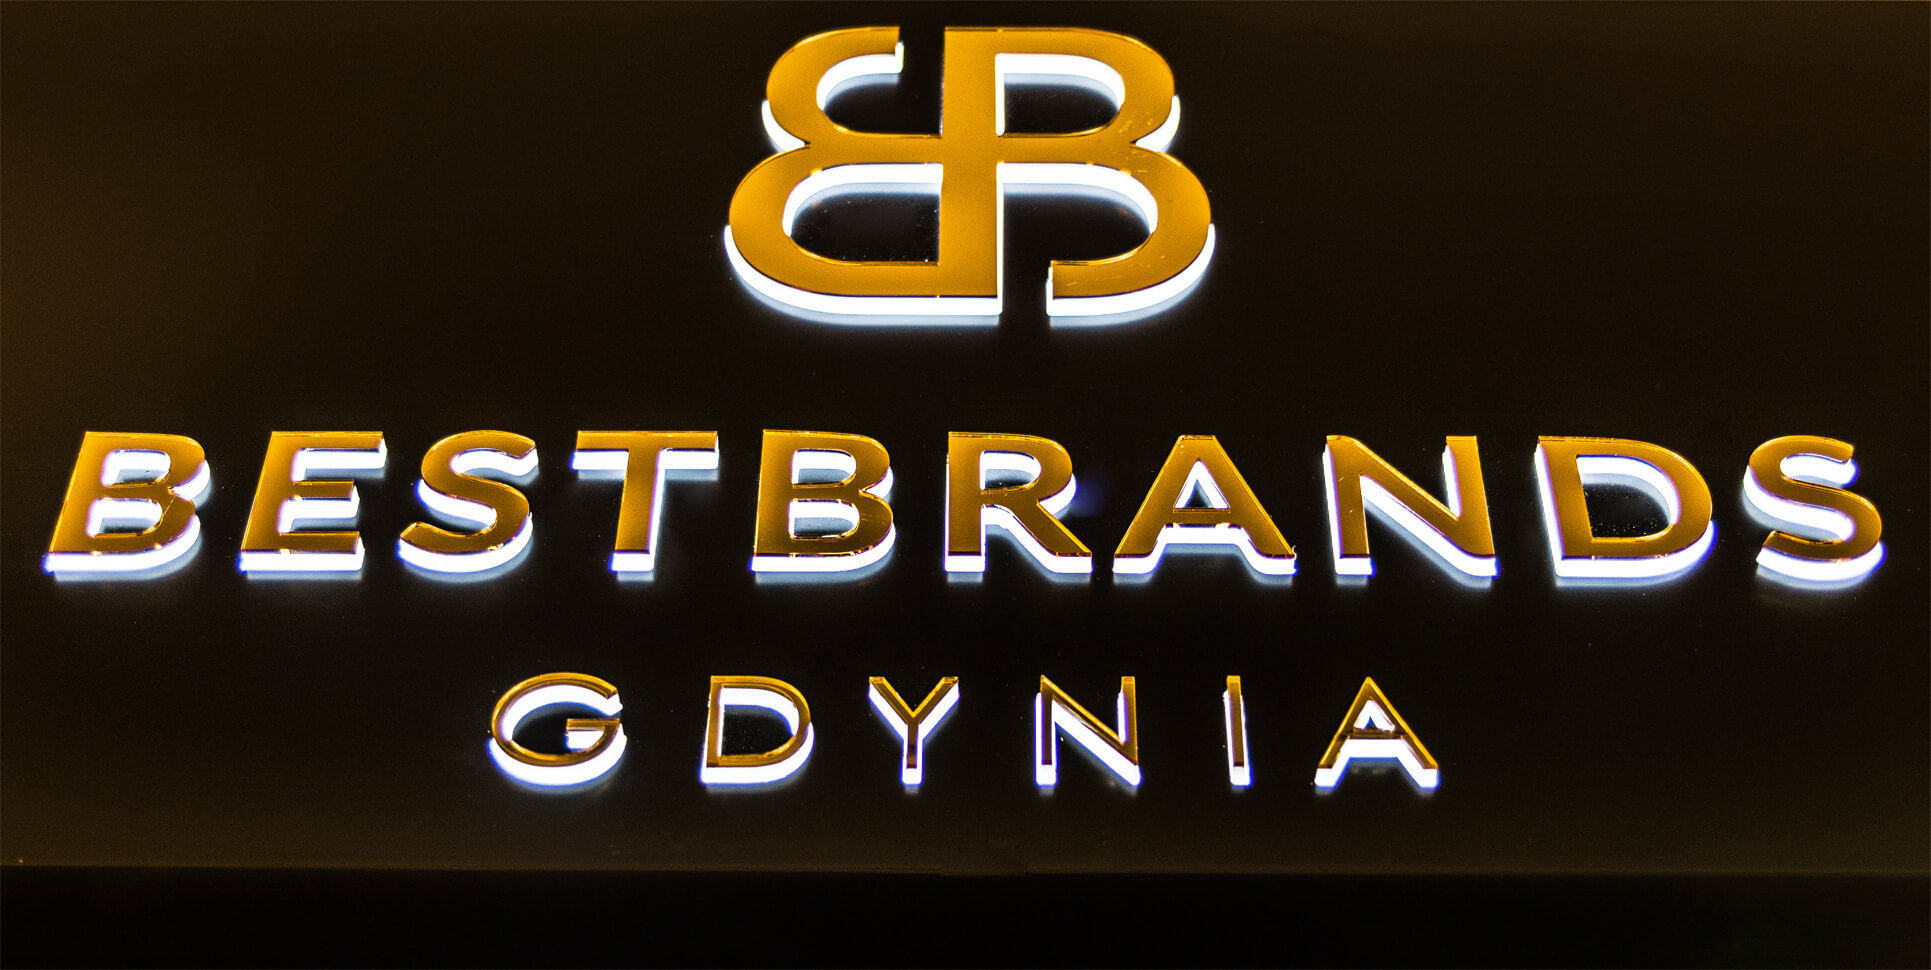 Bestbrands Gdynia - Bestbrands Gdynia - luminous advertising panel placed above the entrance